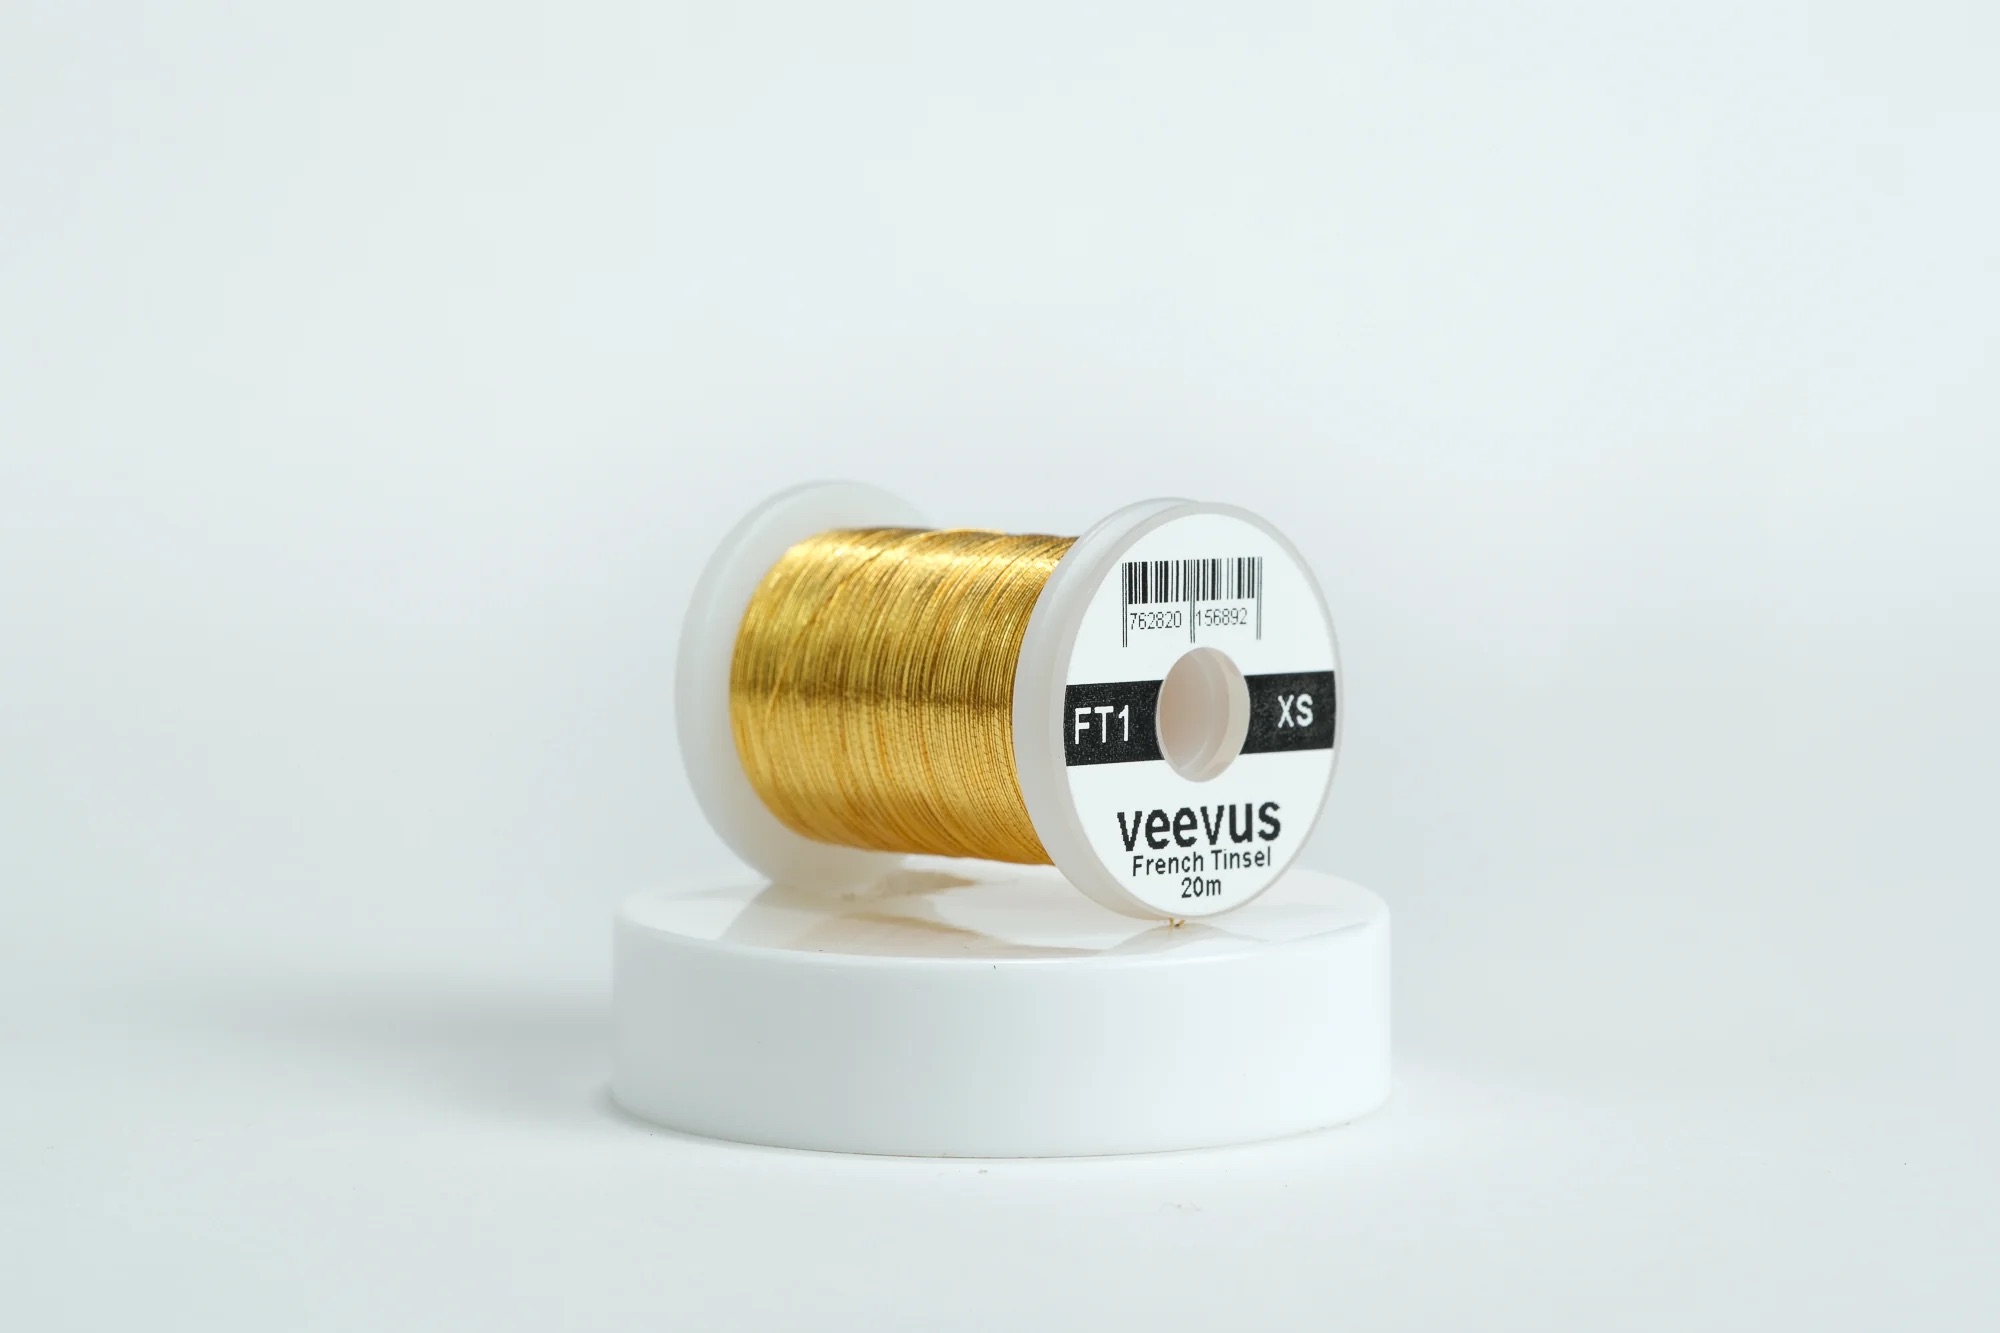 Veevus French Tinsel - Gold - XS